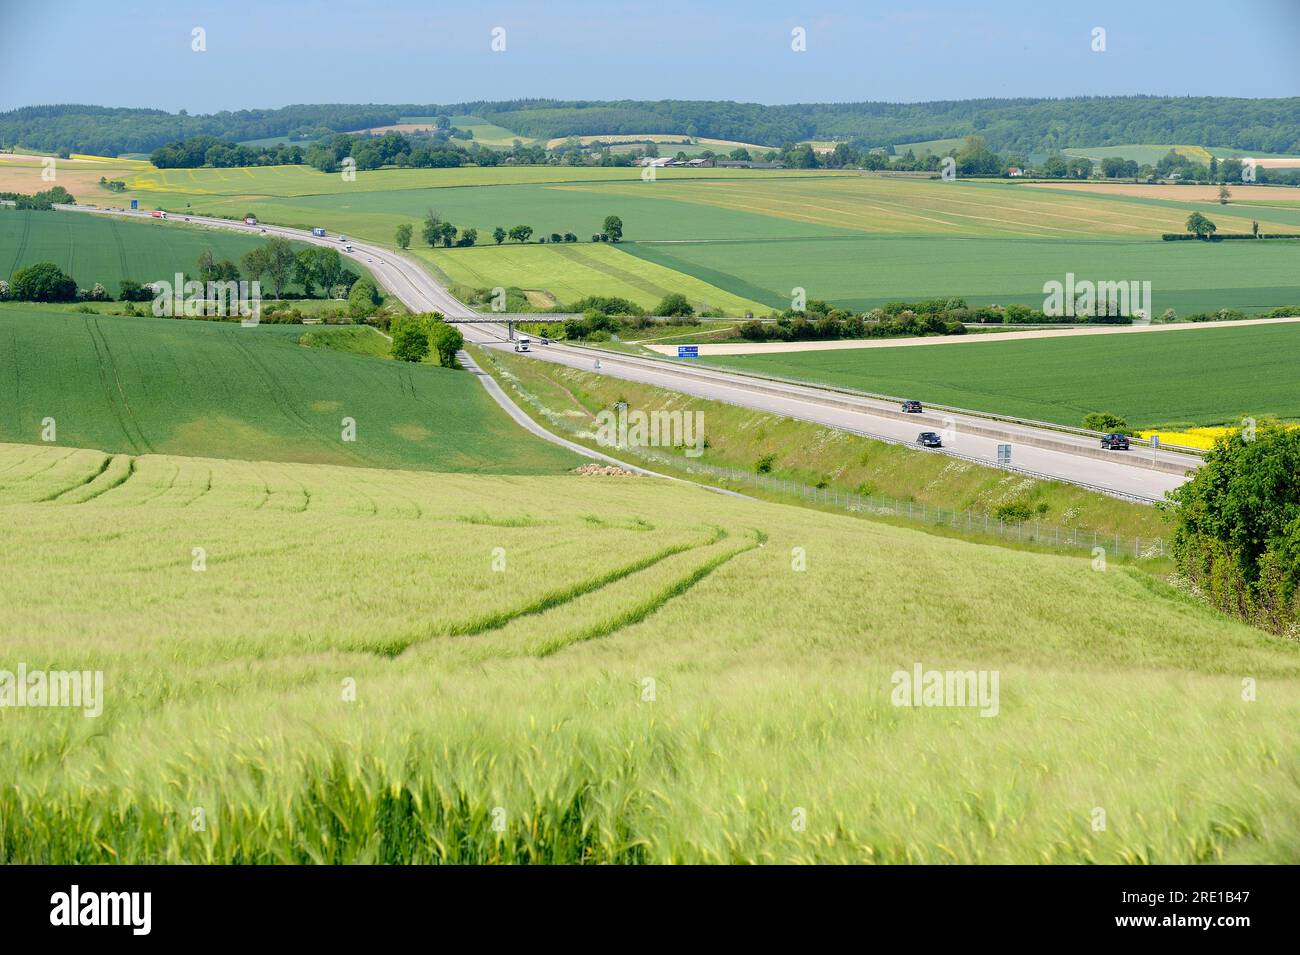 Highway A28 crossing the “pays de Bray” area. Motorway in the middle of wheat, barley and escurgeon fields Stock Photo